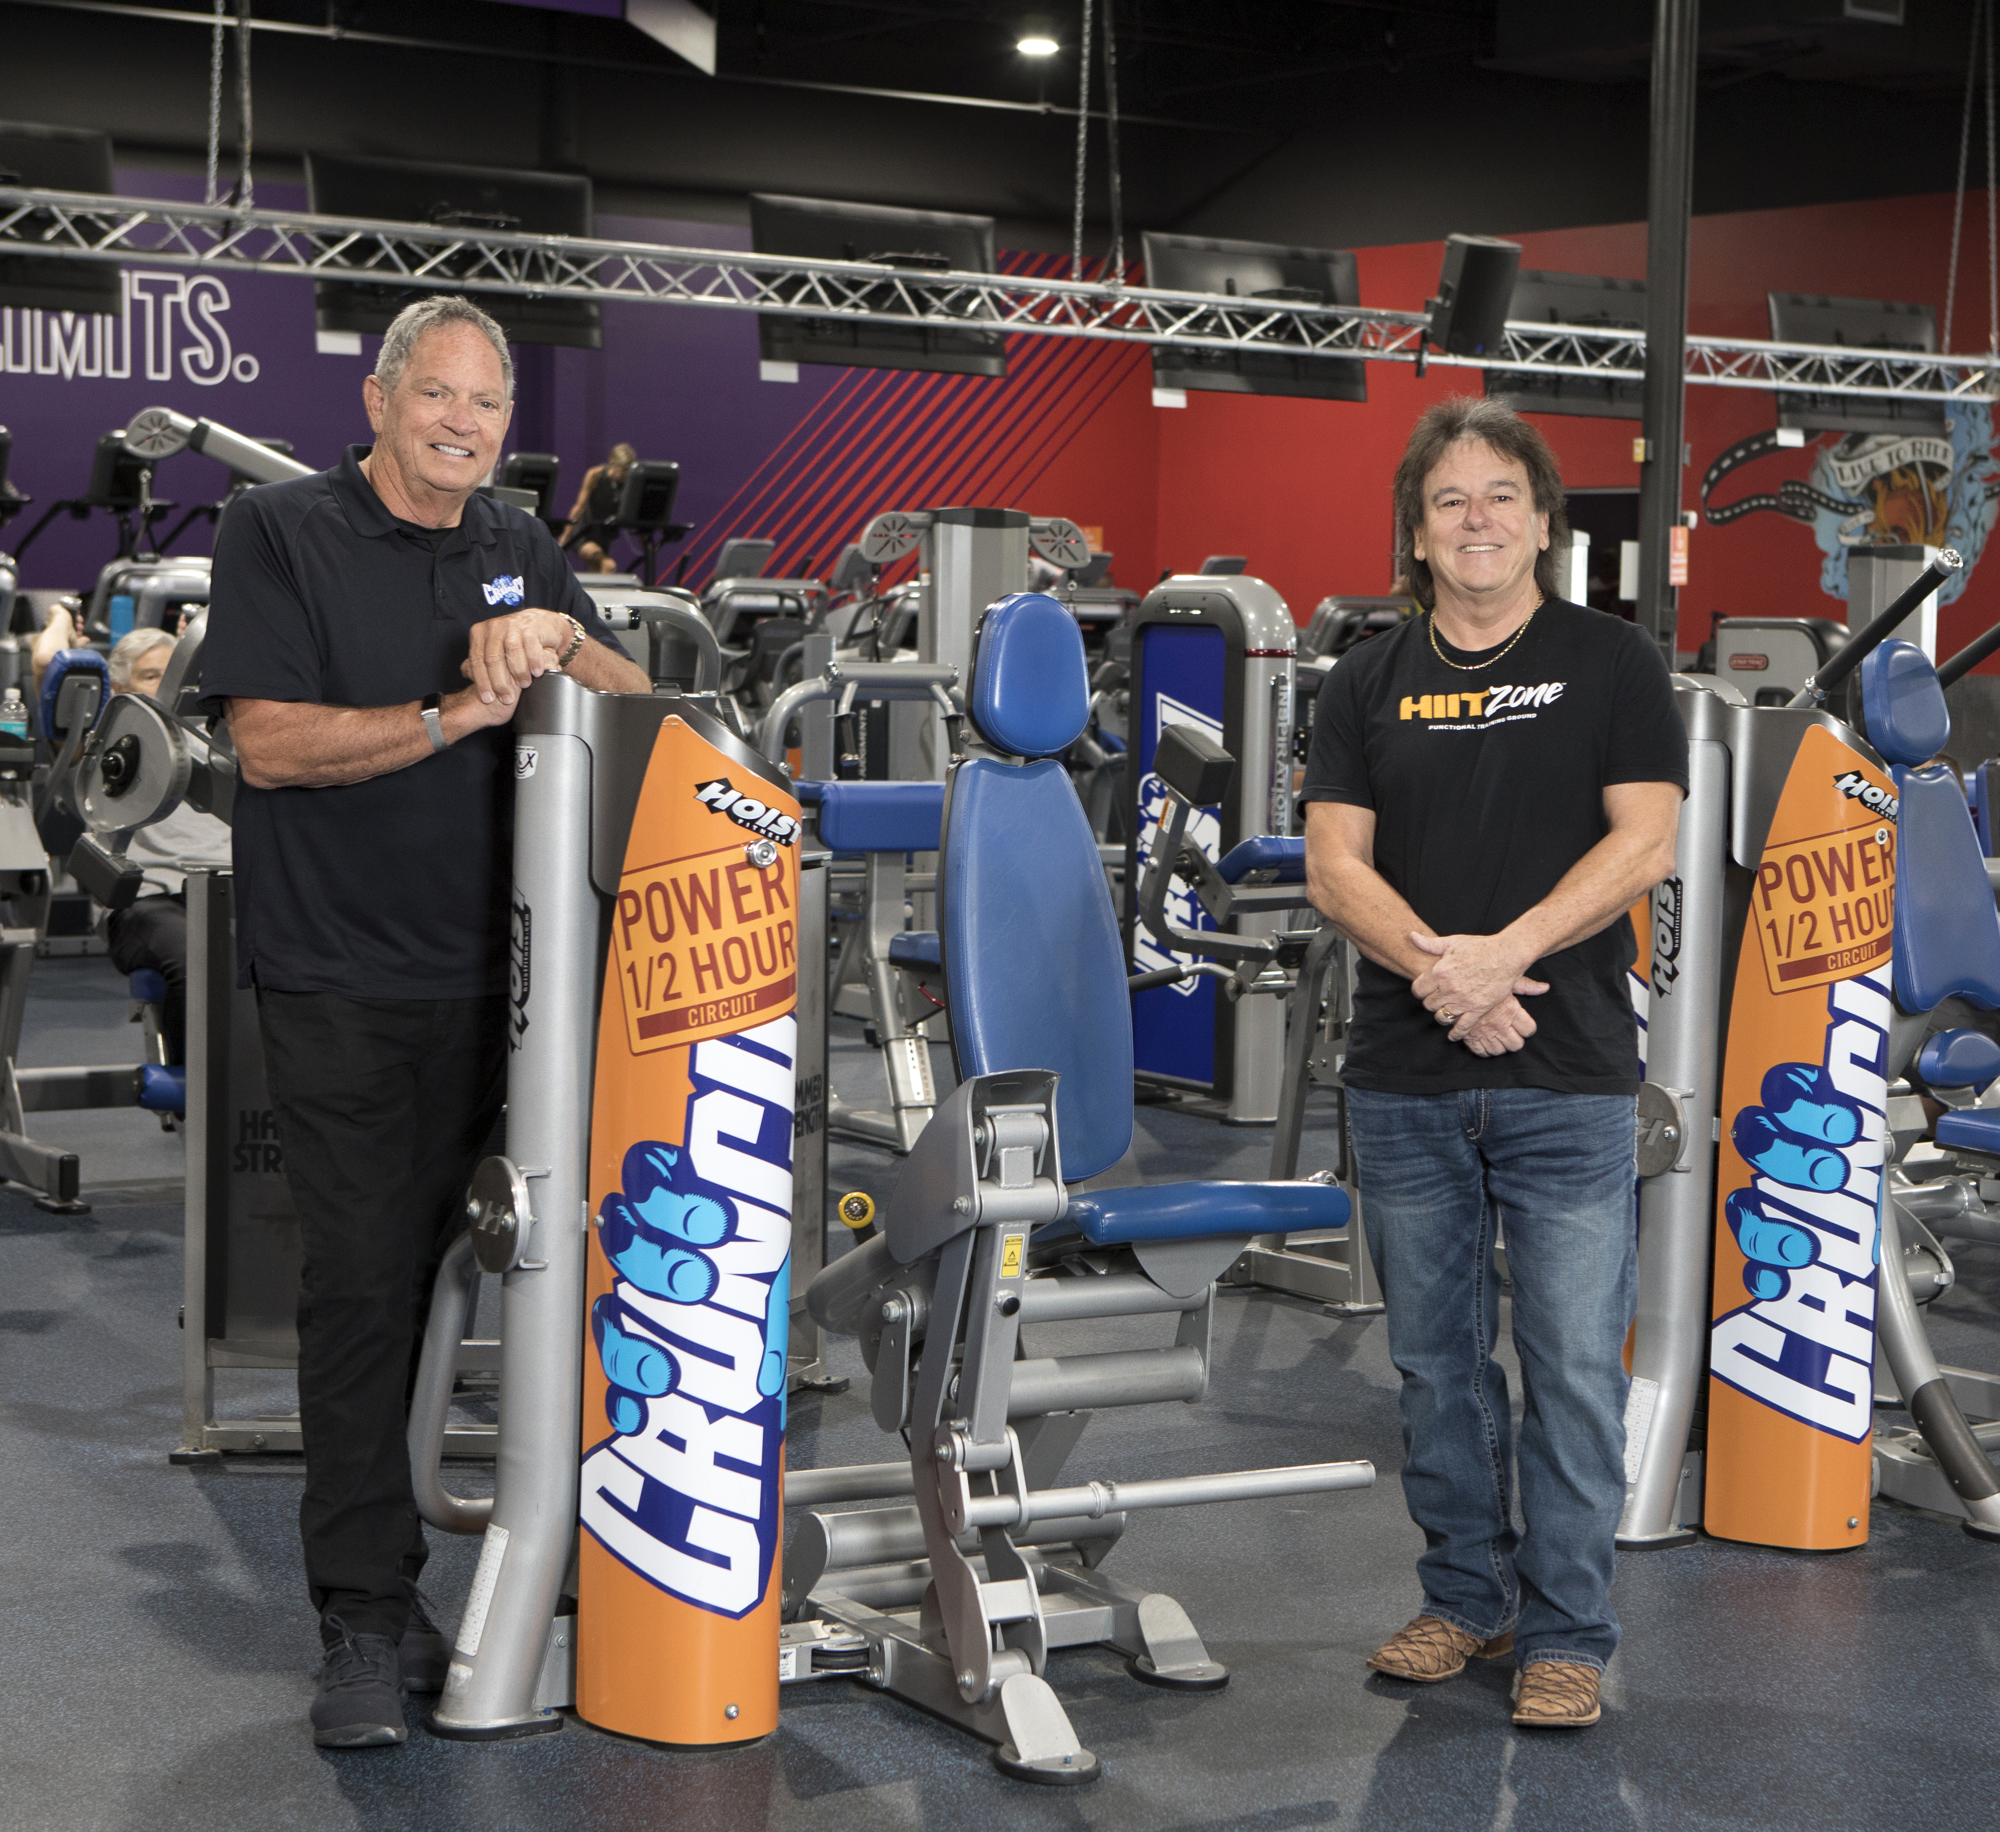 Mark Wemple. Longtime gym executives and entrepreneurs Vince Julien and Geoff Dyer have been working together opening Crunch fitness franchise locations since 2014.